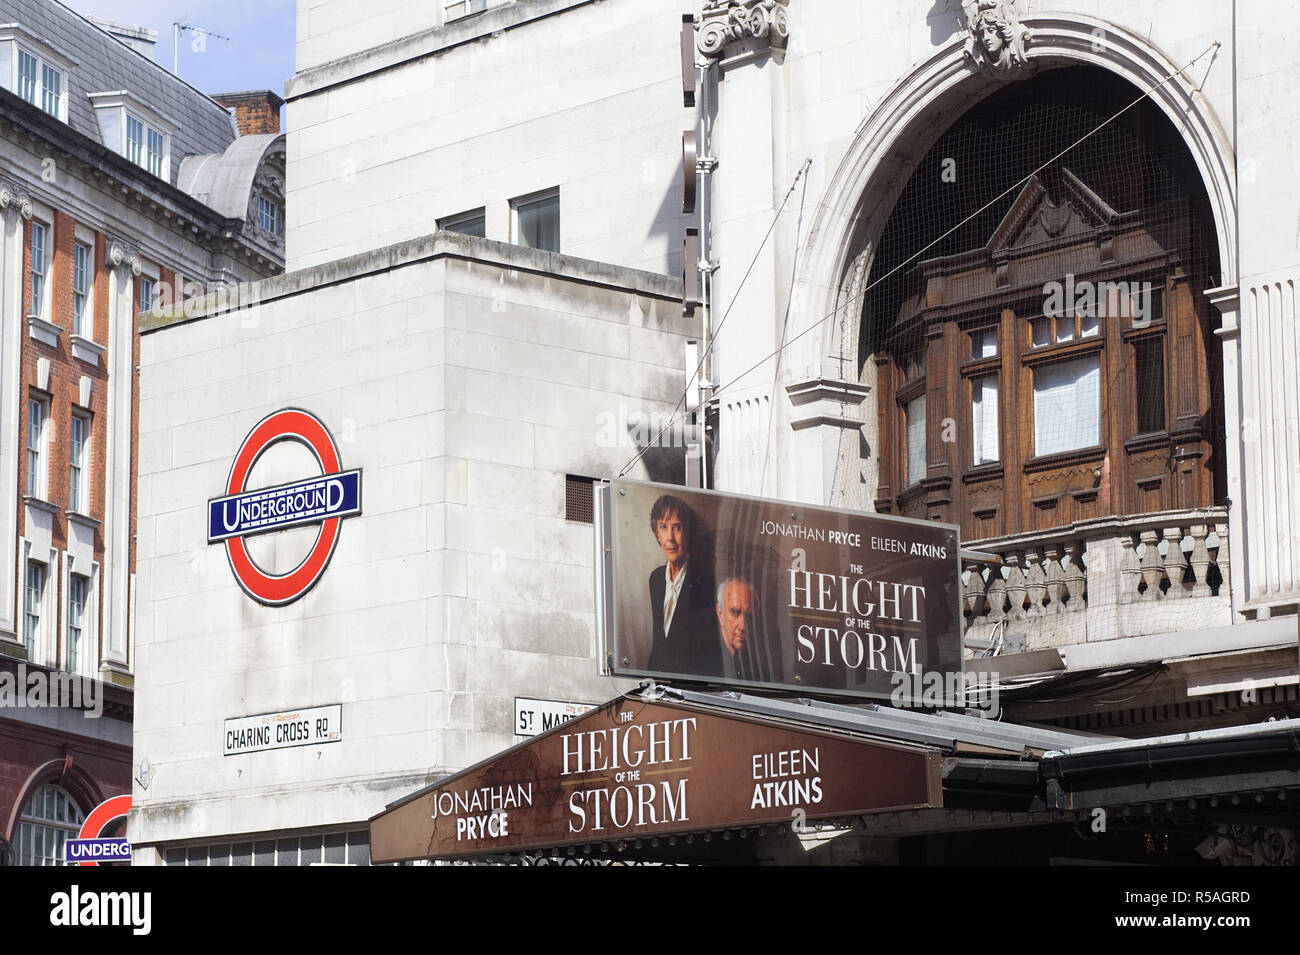 The height of the storm poster and charing cross sign. Stock Photo